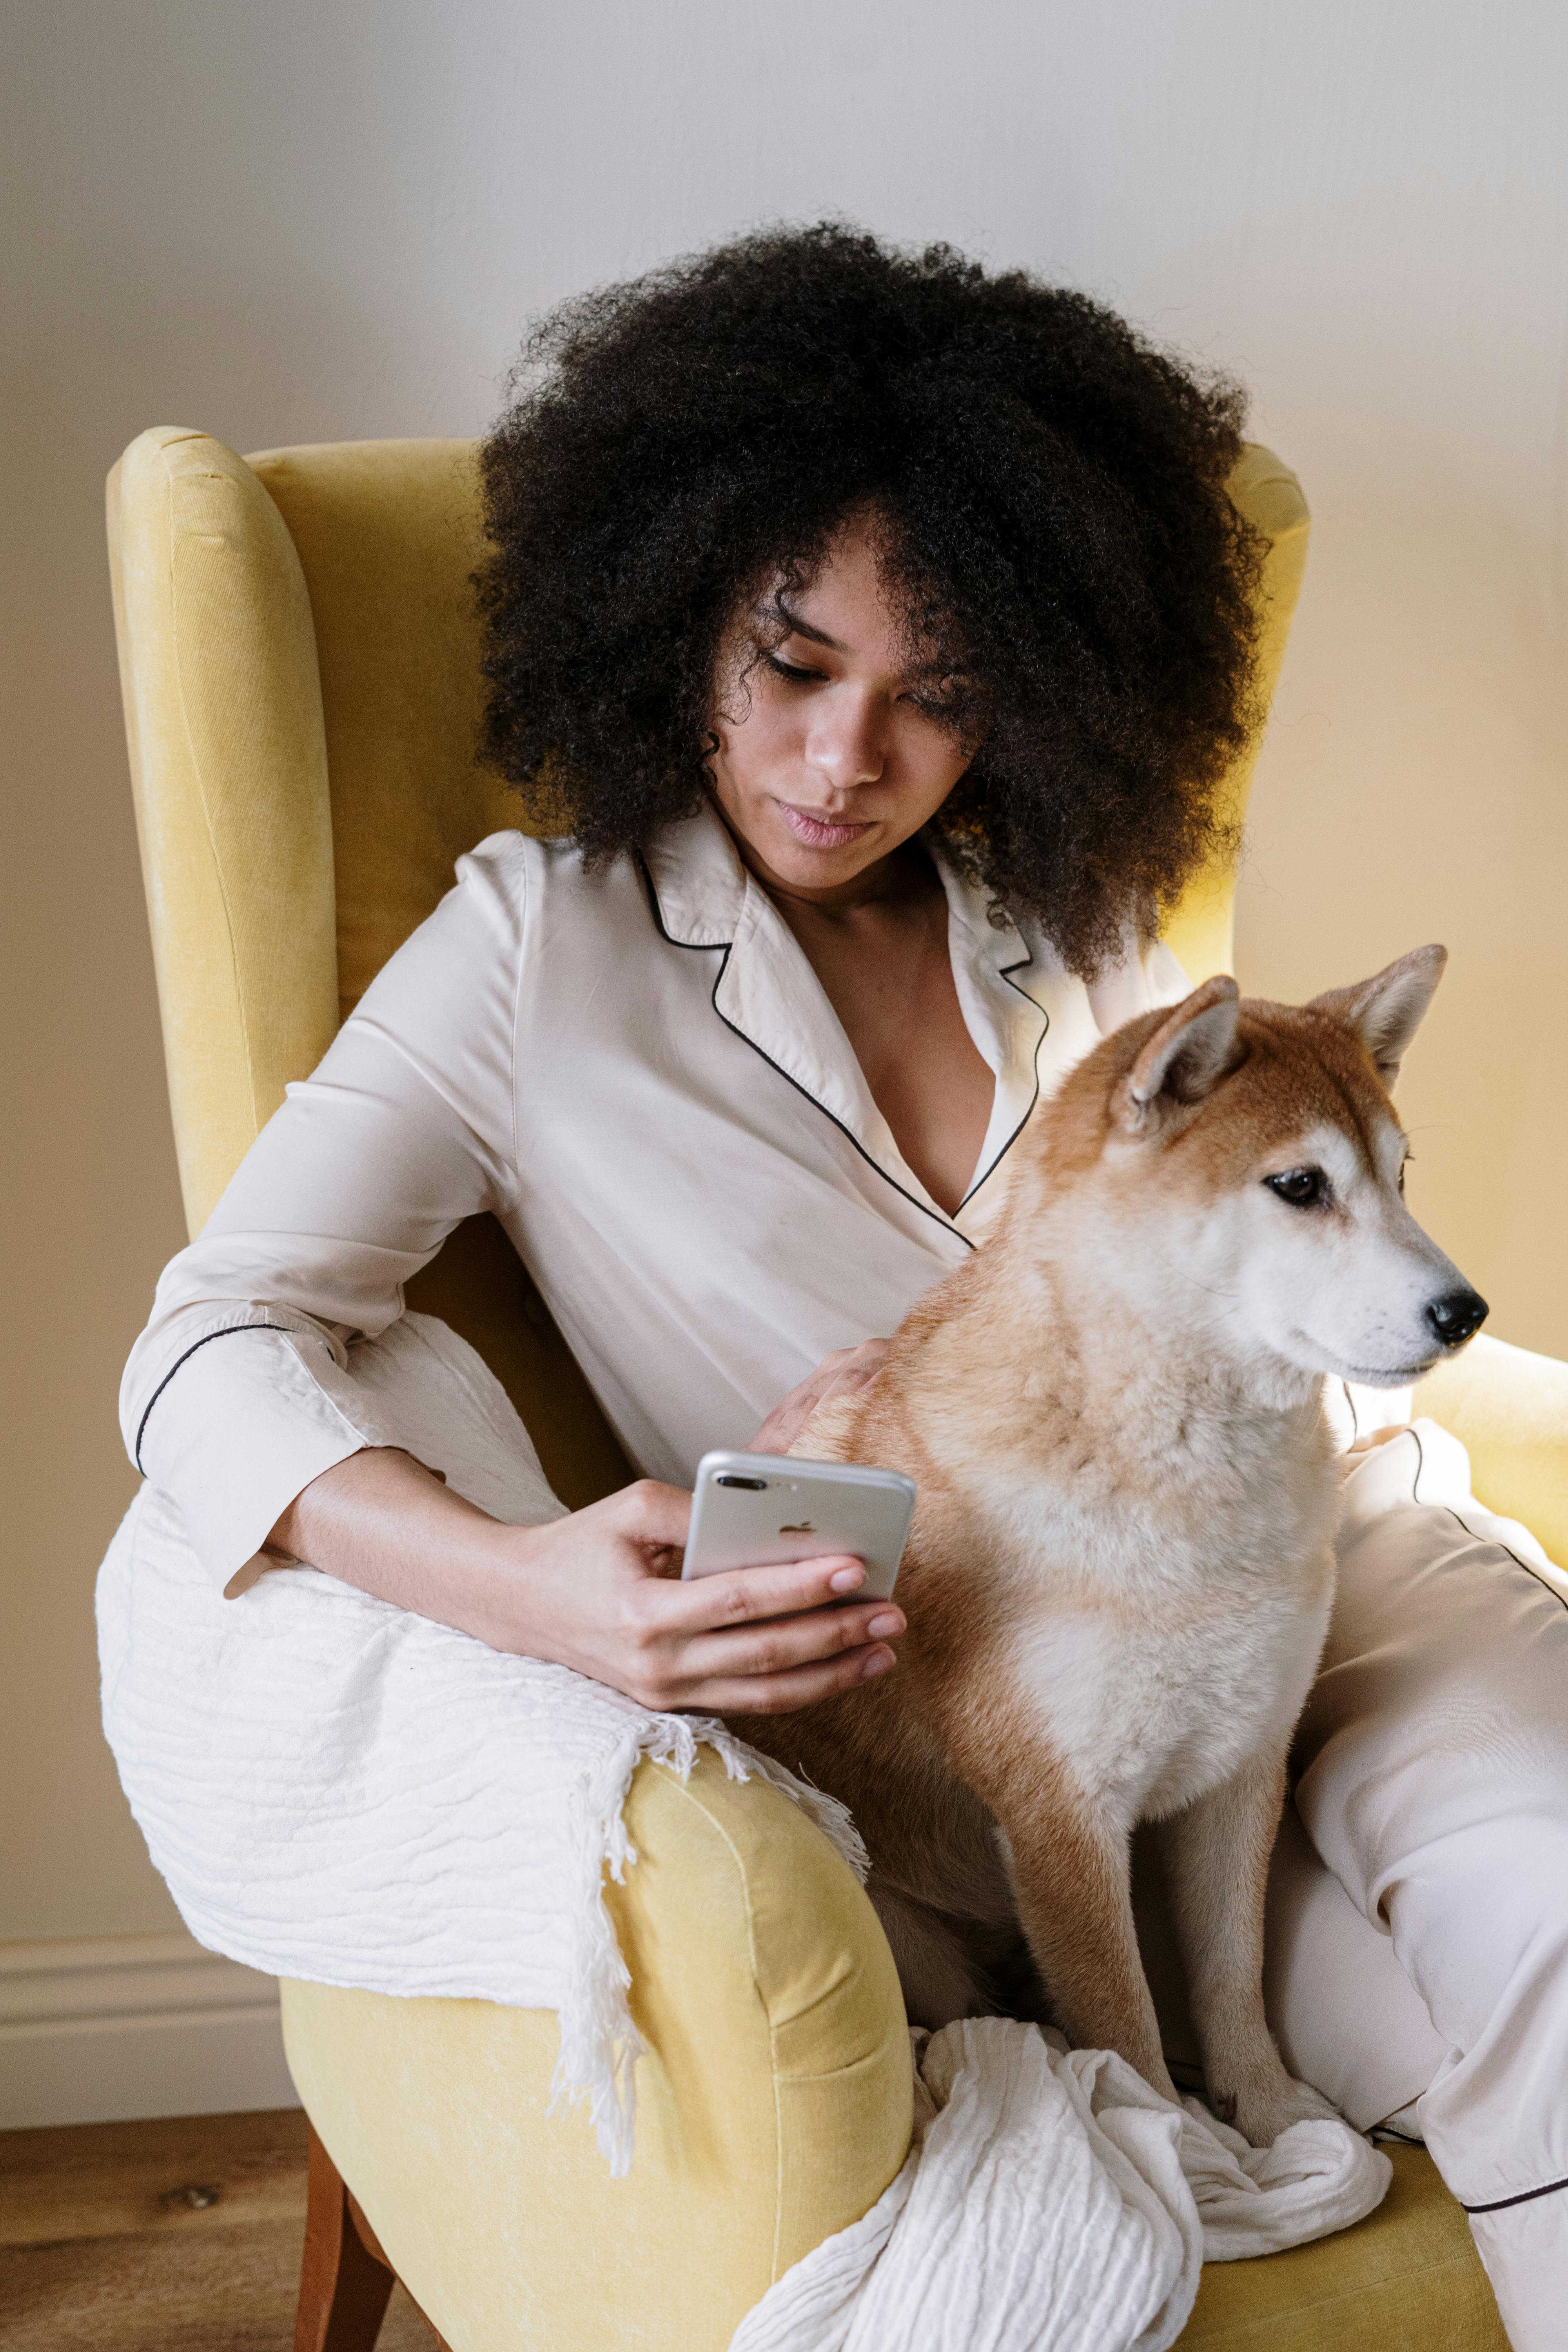 A woman in pajamas sitting with her dog | Source: Pexels